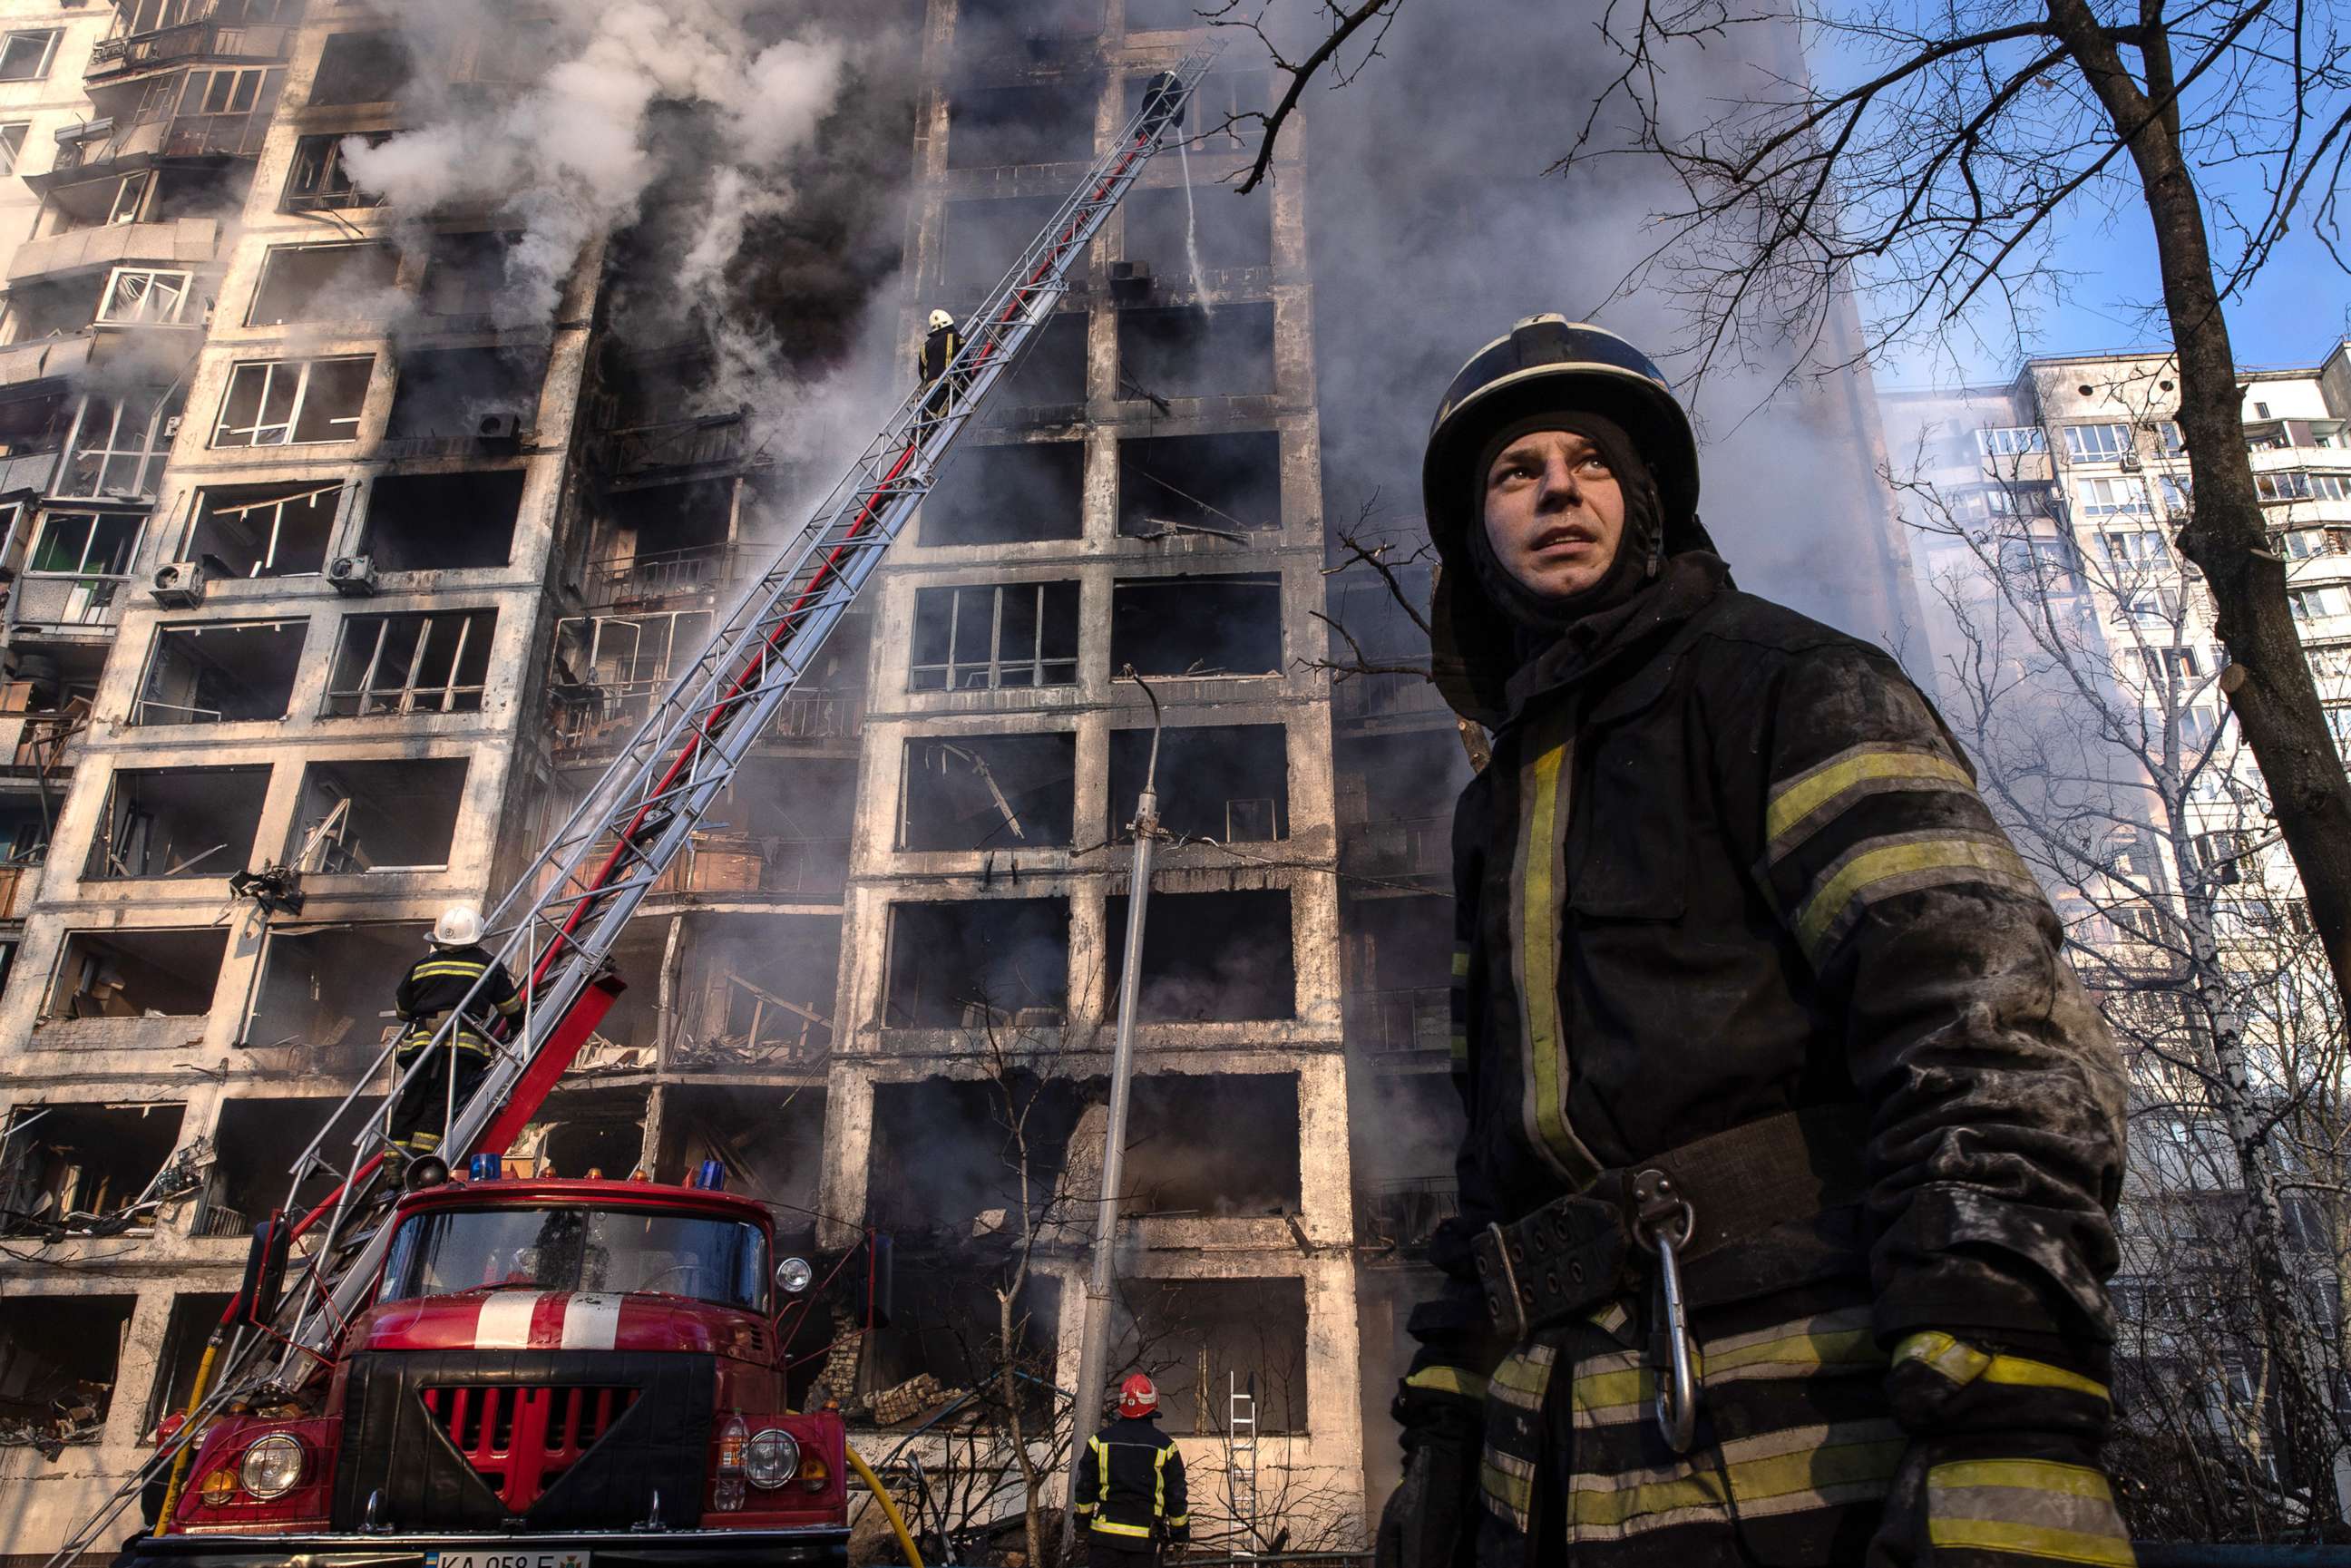 PHOTO: Firefighters work to extinguish a fire at a residential apartment building after it was hit by a Russian attack in the early hours of the morning in the Sviatoshynskyi District on March 15, 2022, in Kyiv, Ukraine.